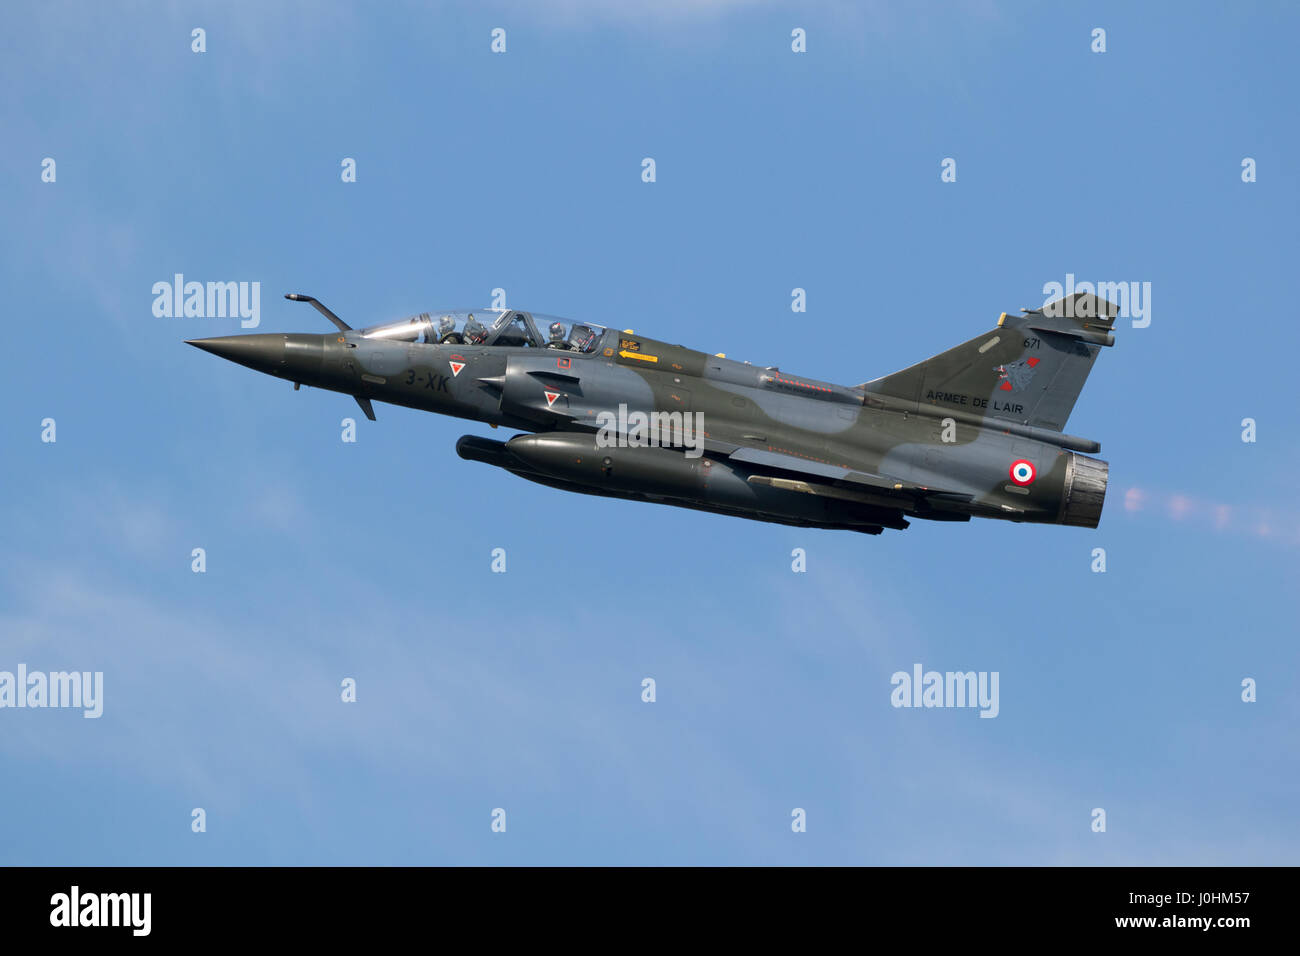 French Air Force Dassault Mirage 2000D fighter jet plane take off Stock Photo